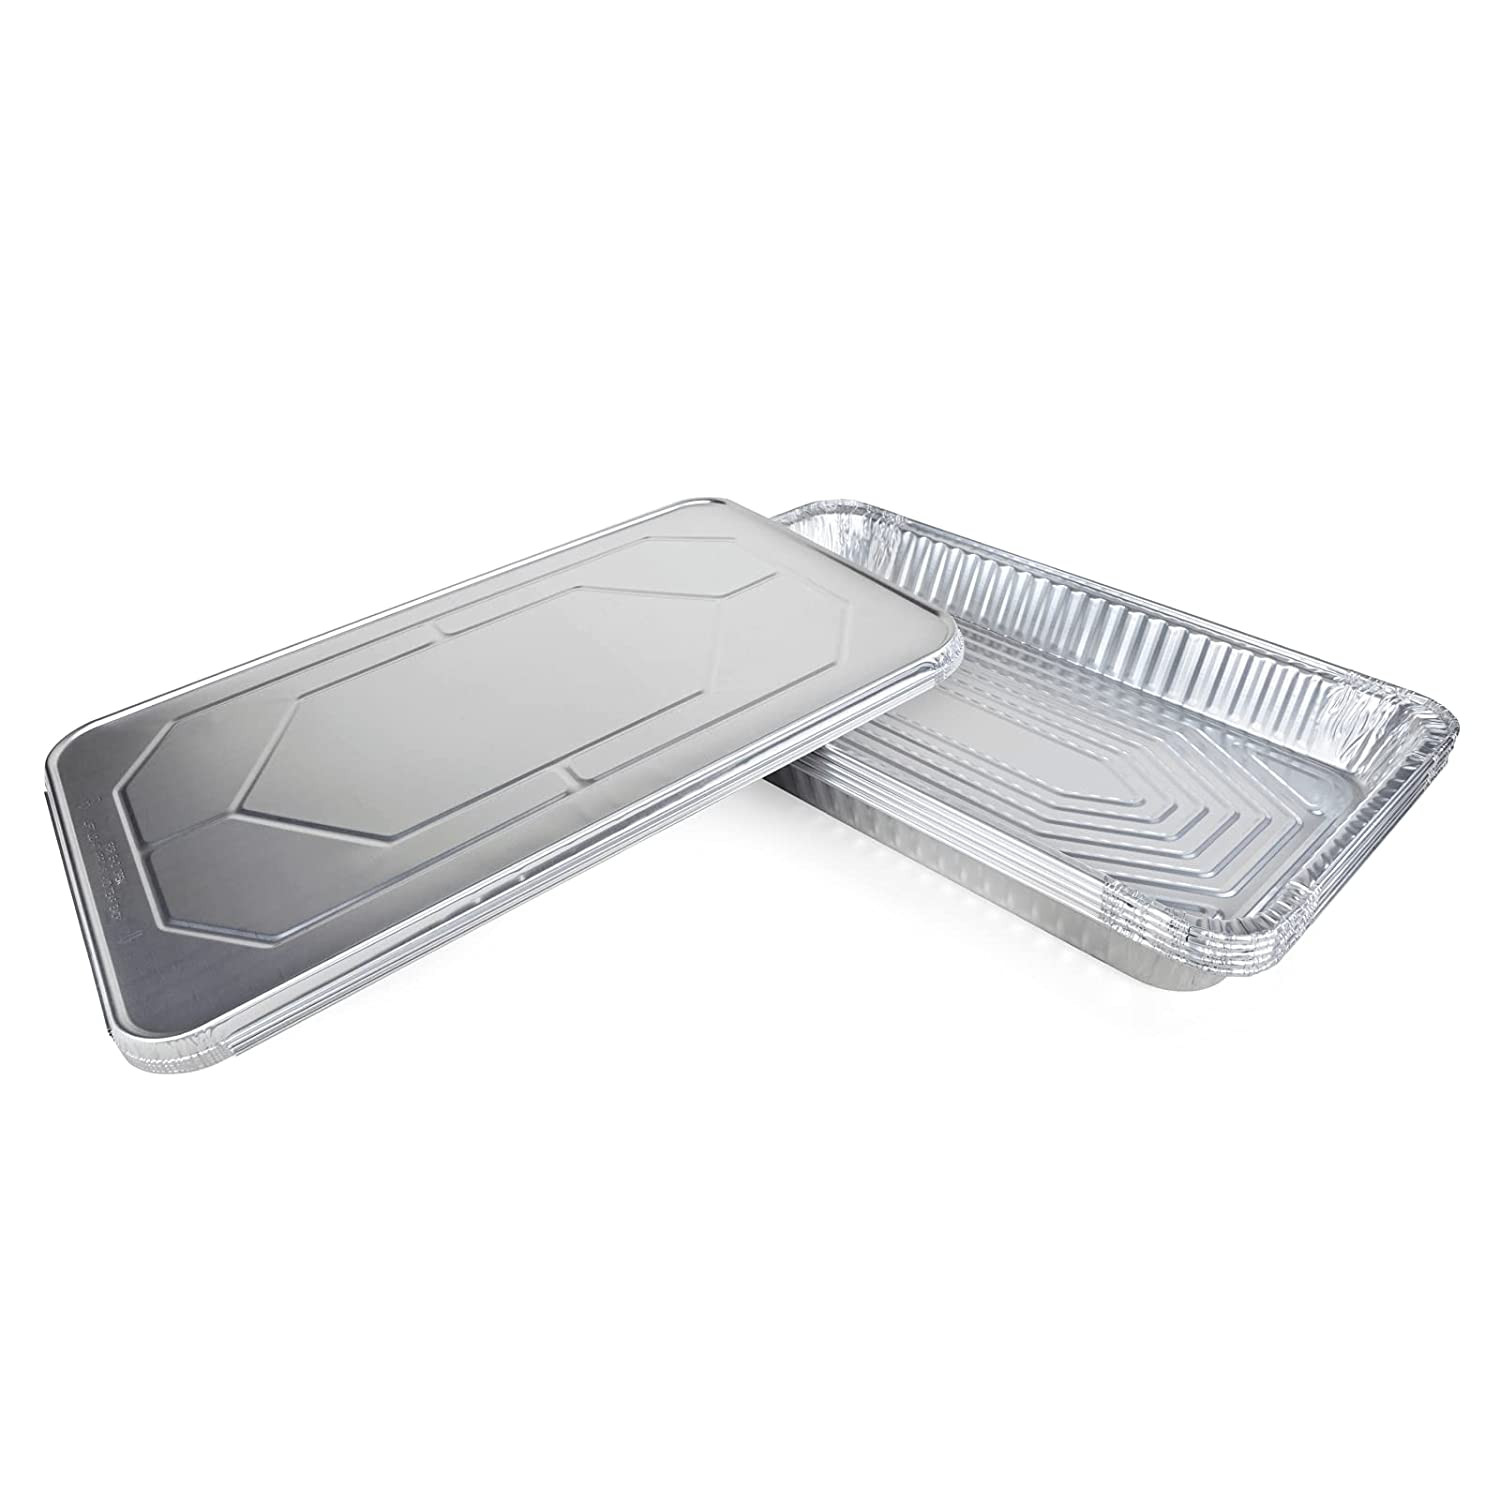 https://idlpack.com/image/cache/catalog/Products/Foil%20Pans%20and%20Trays/61KPgkM5ksL._SL1500_-1500x1500.jpg